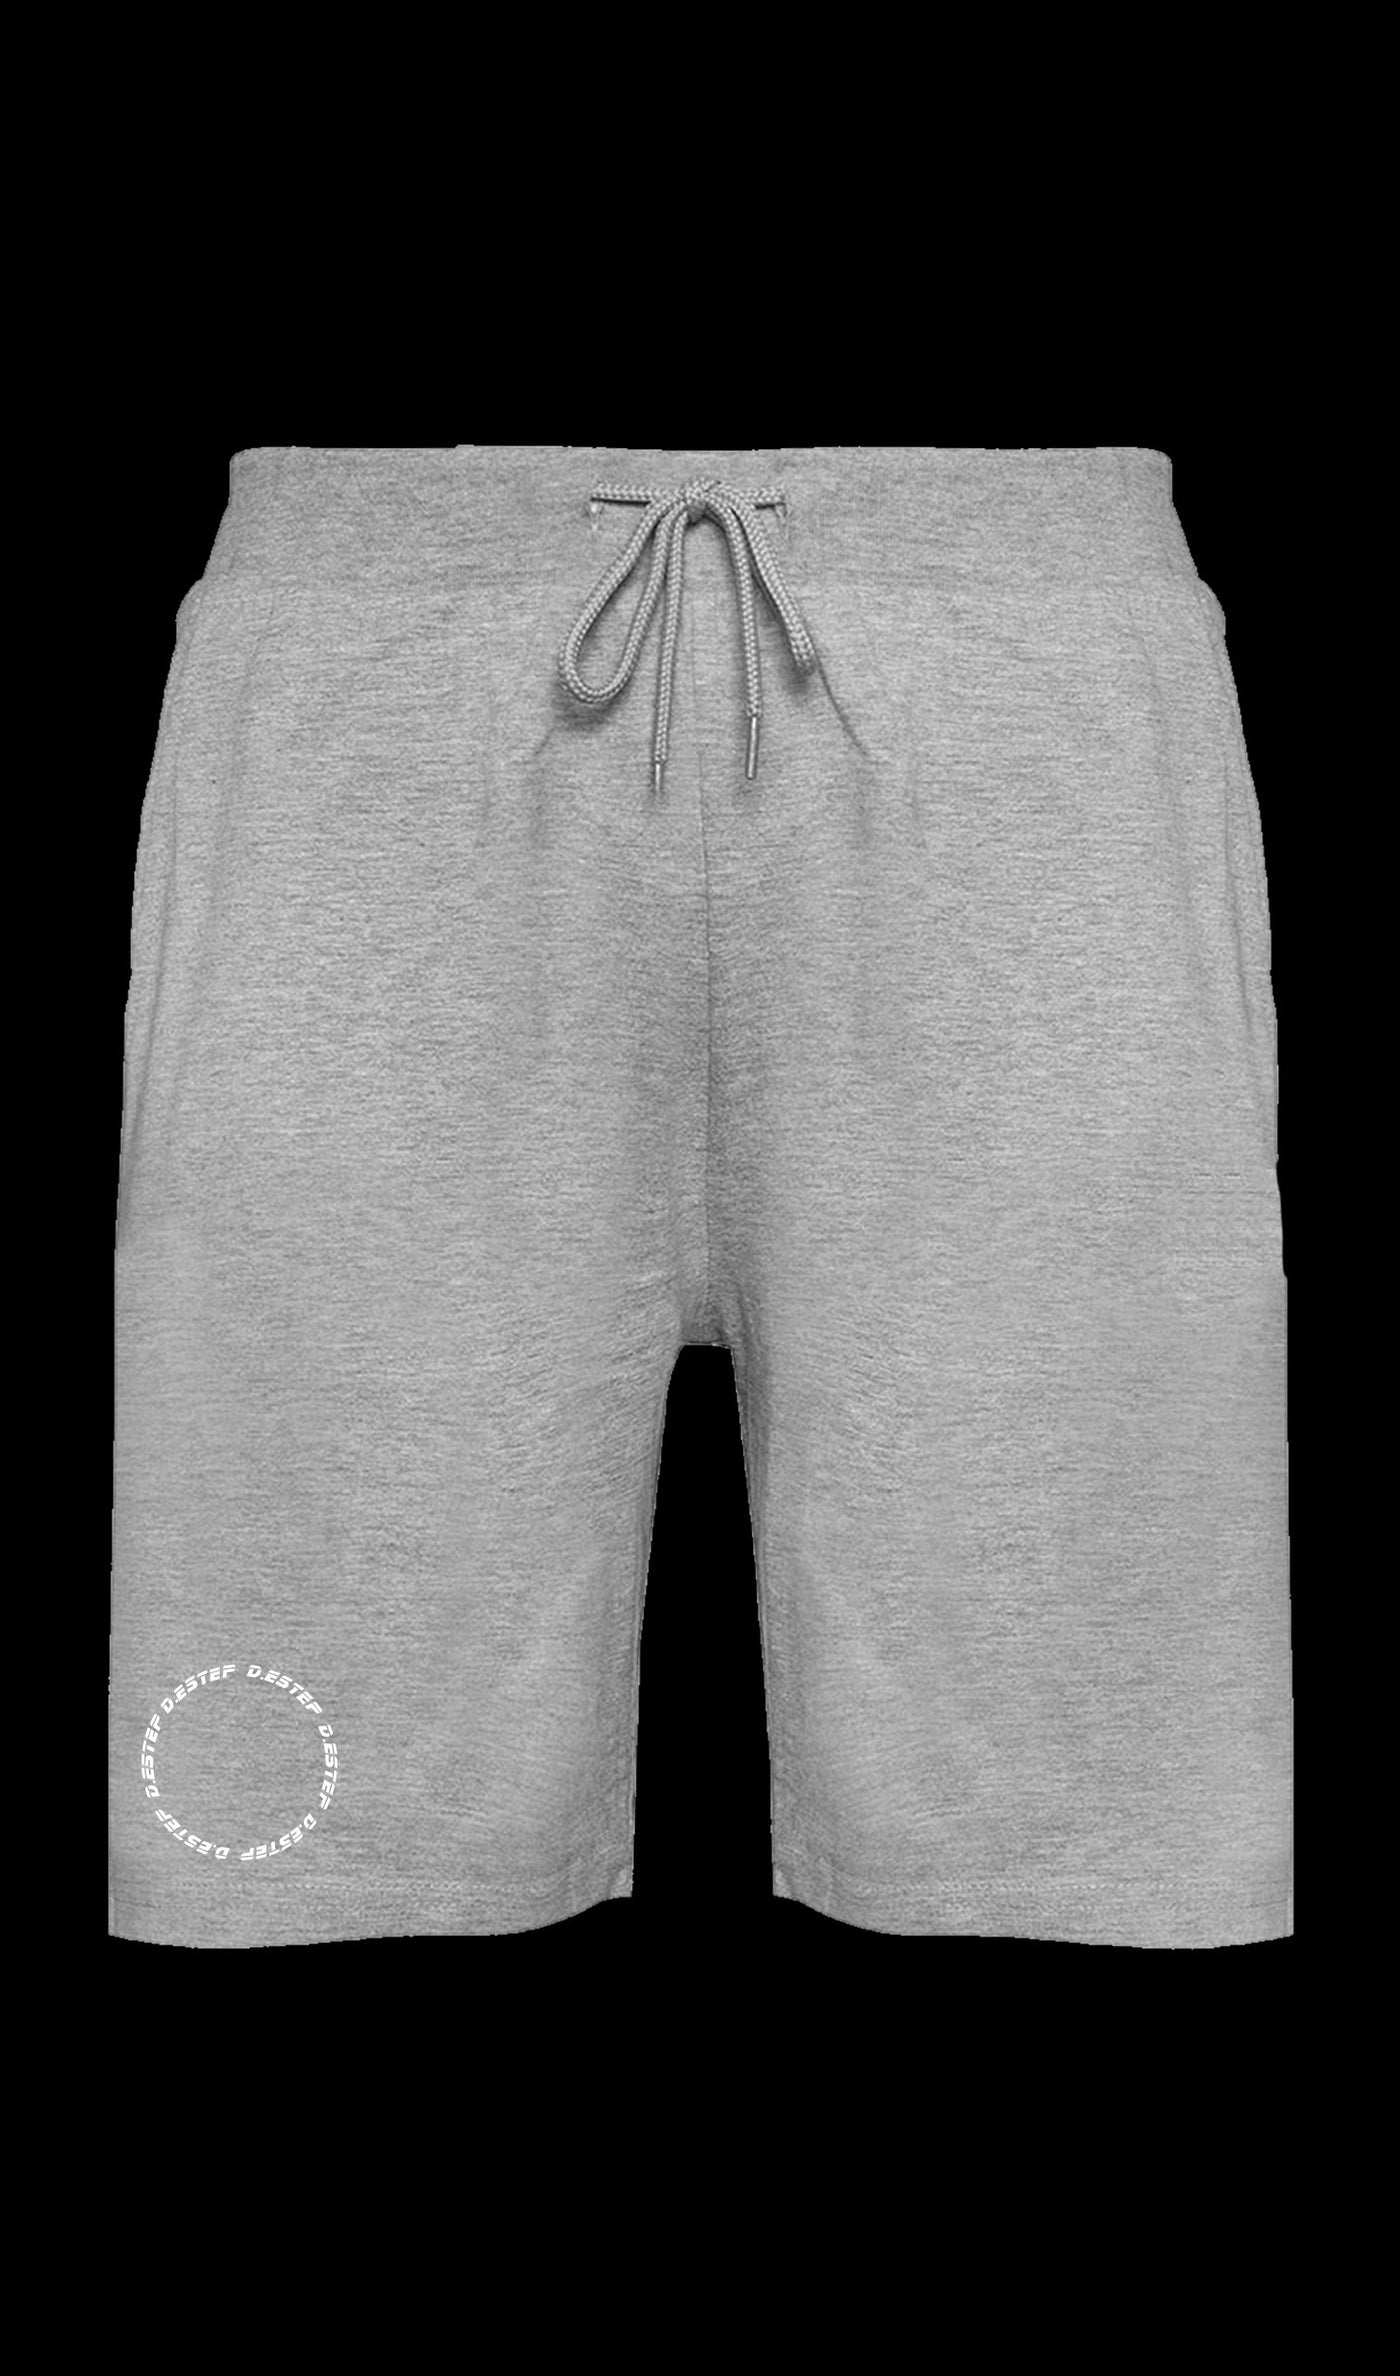 GRAY “Outer Space” Sweatshorts